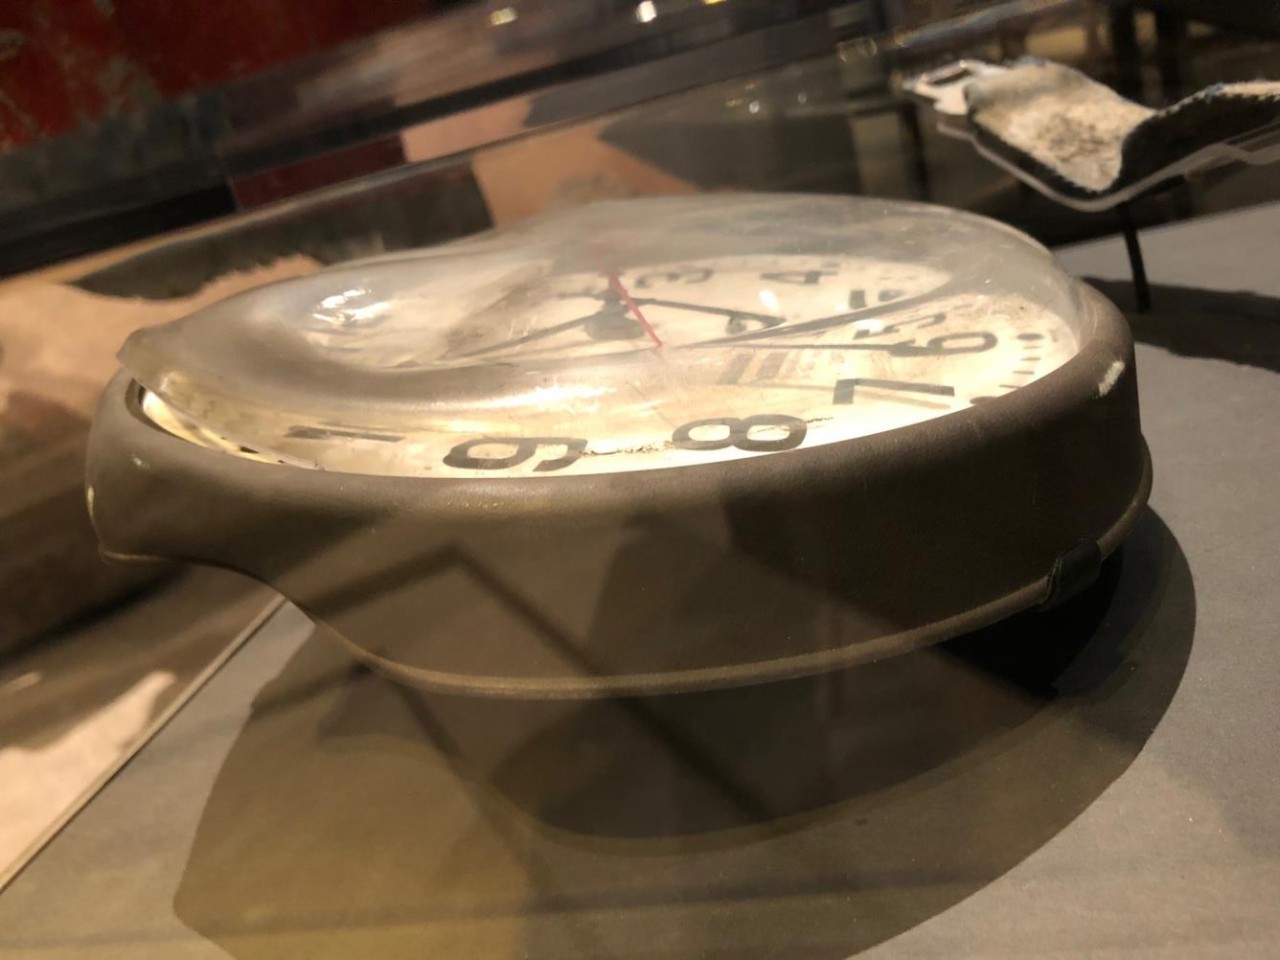 <p>Profile view of 12-hour clock with white face and black numbers. Clear plastic cover blackened and warped from intense heat. Recovered from Pentagon after terrorist attack.</p>